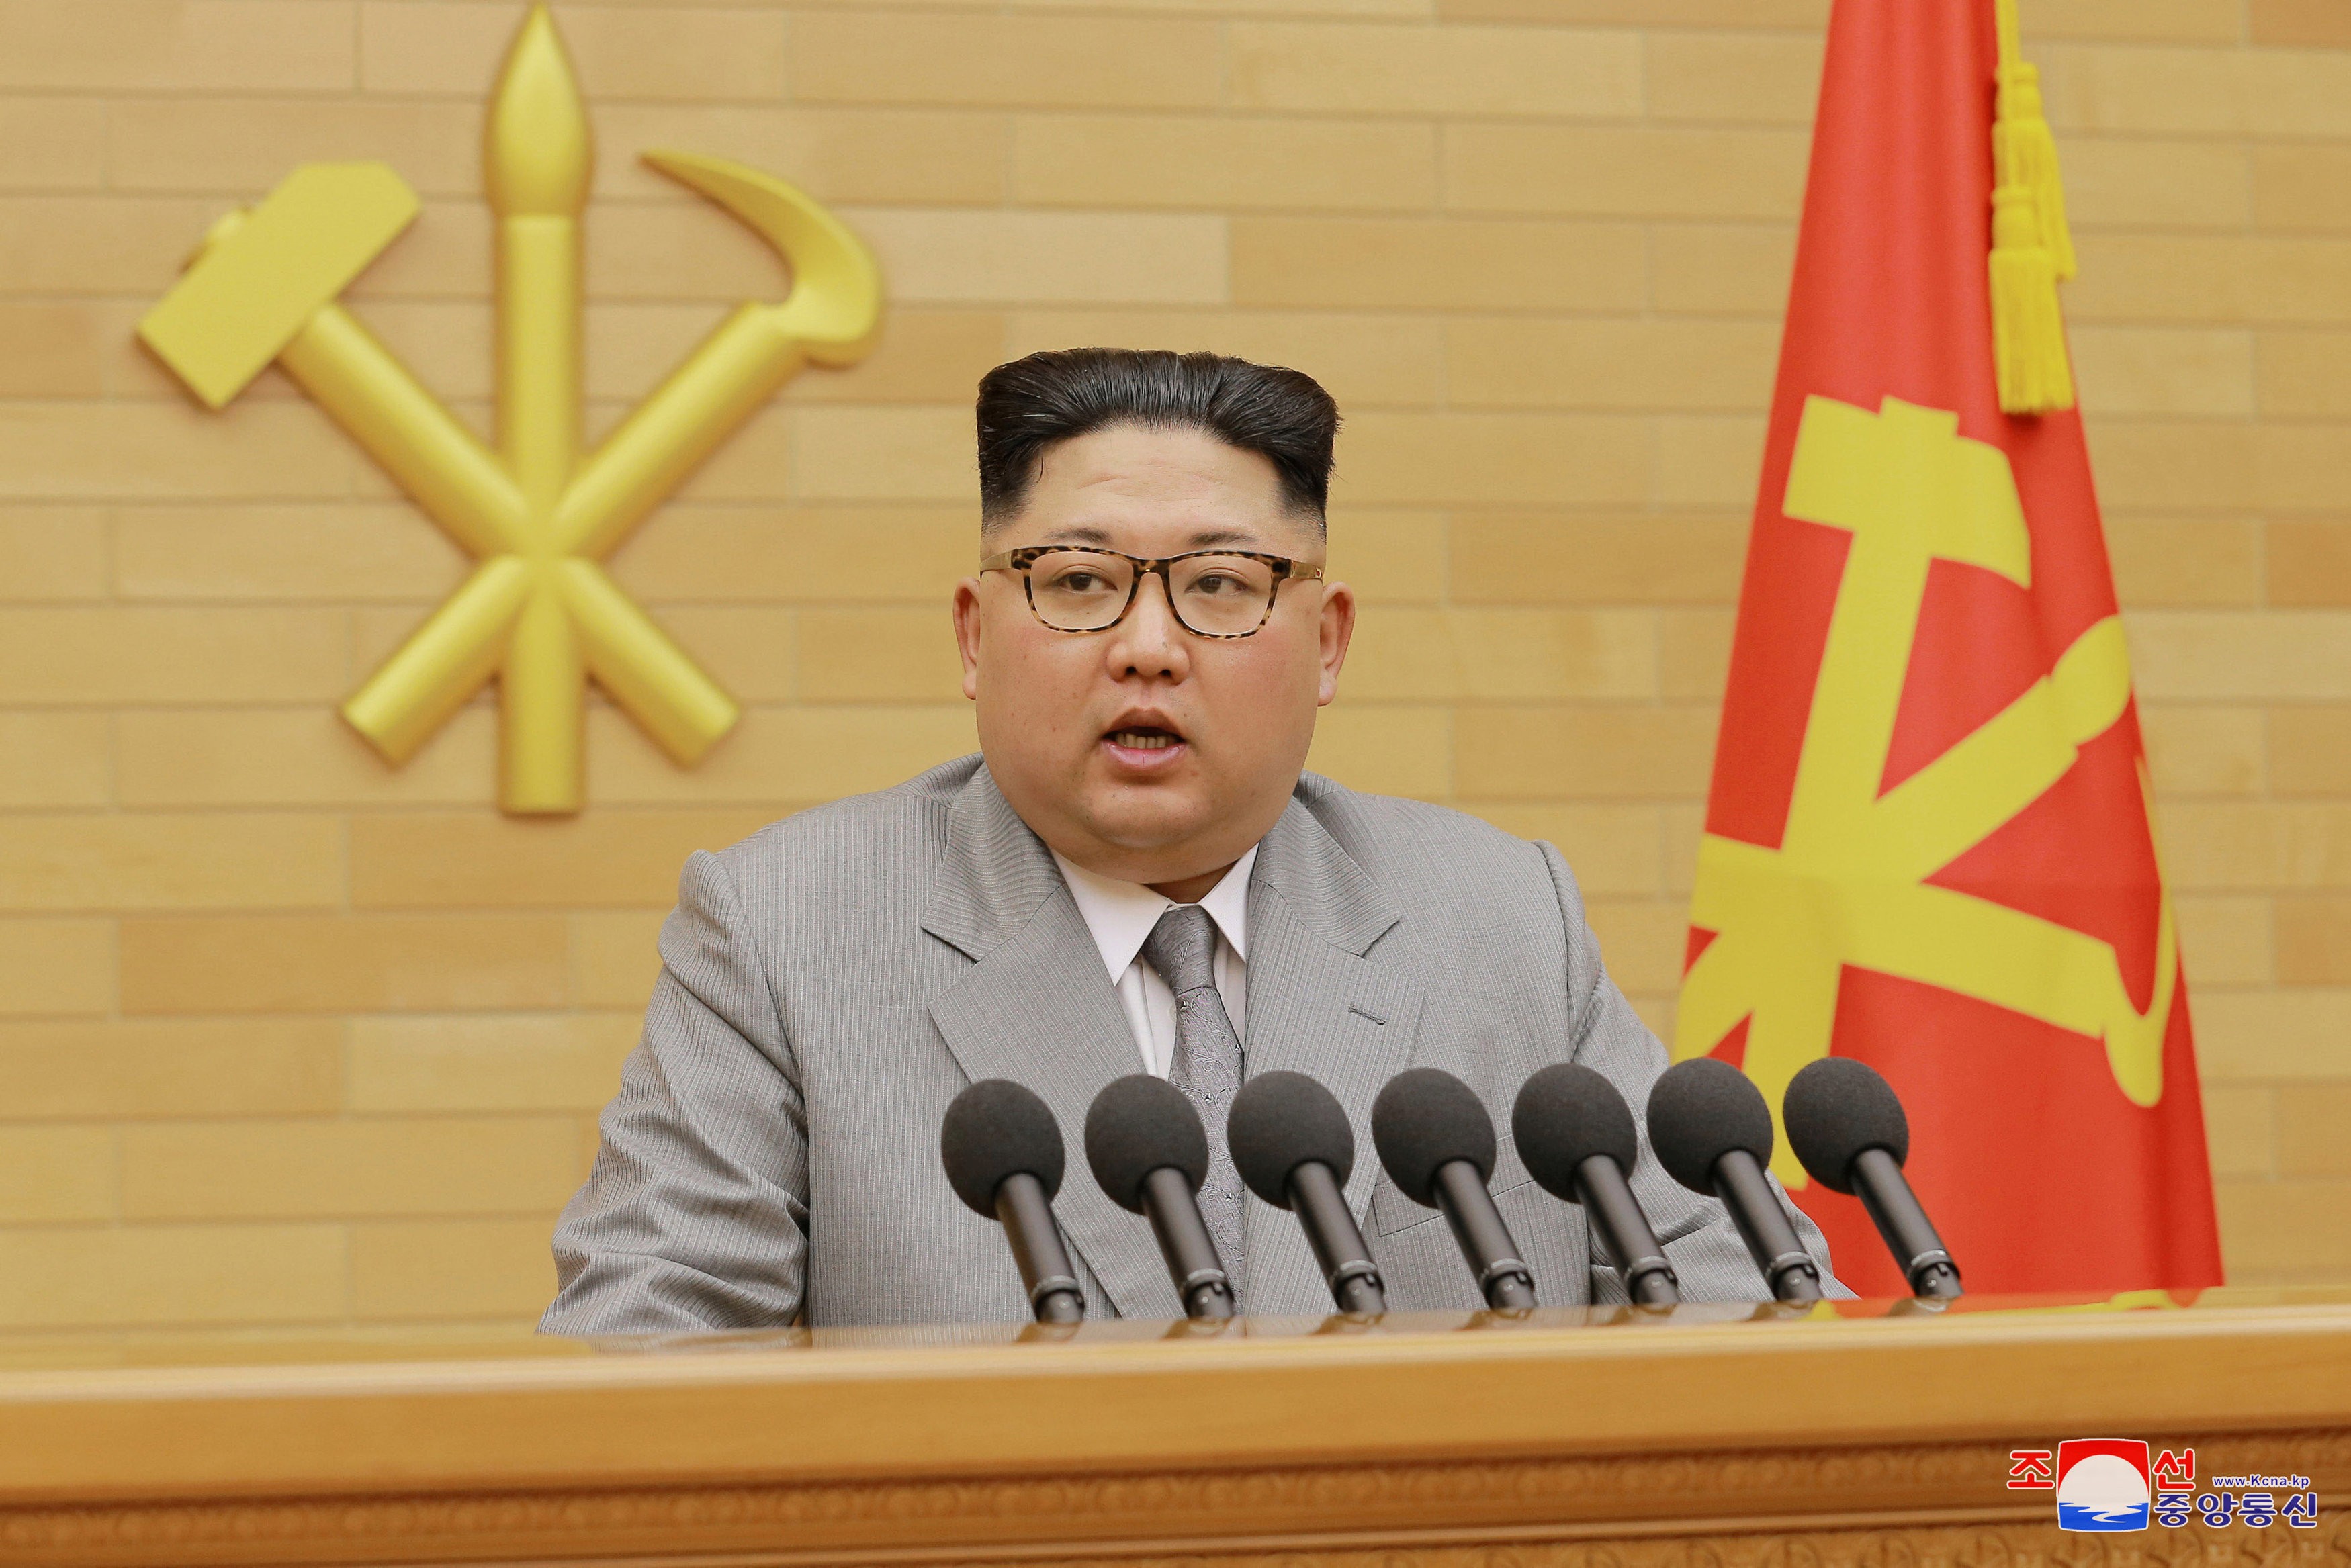 Kim Jong-un condemned the United States while offering an olive branch to South Korea in a New Year’s address. Photo: Reuters